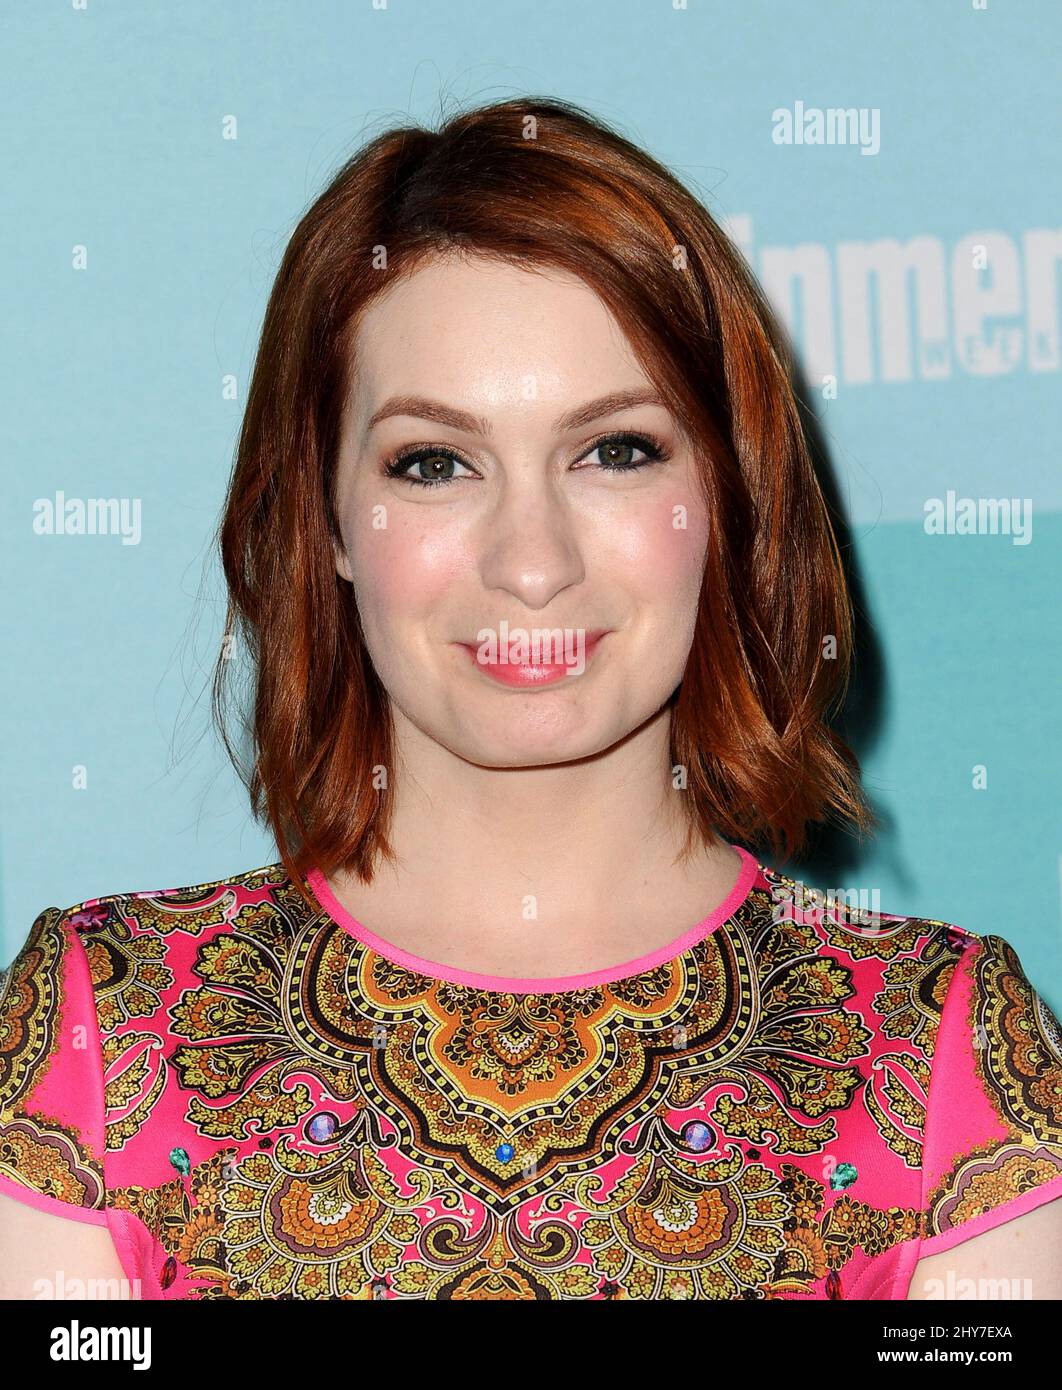 Felicia Day attending the 2015 Entertainment Weekly Comic-Con Celebration, held at Float at Hard Rock Hotel, in San Diego, California. Stock Photo